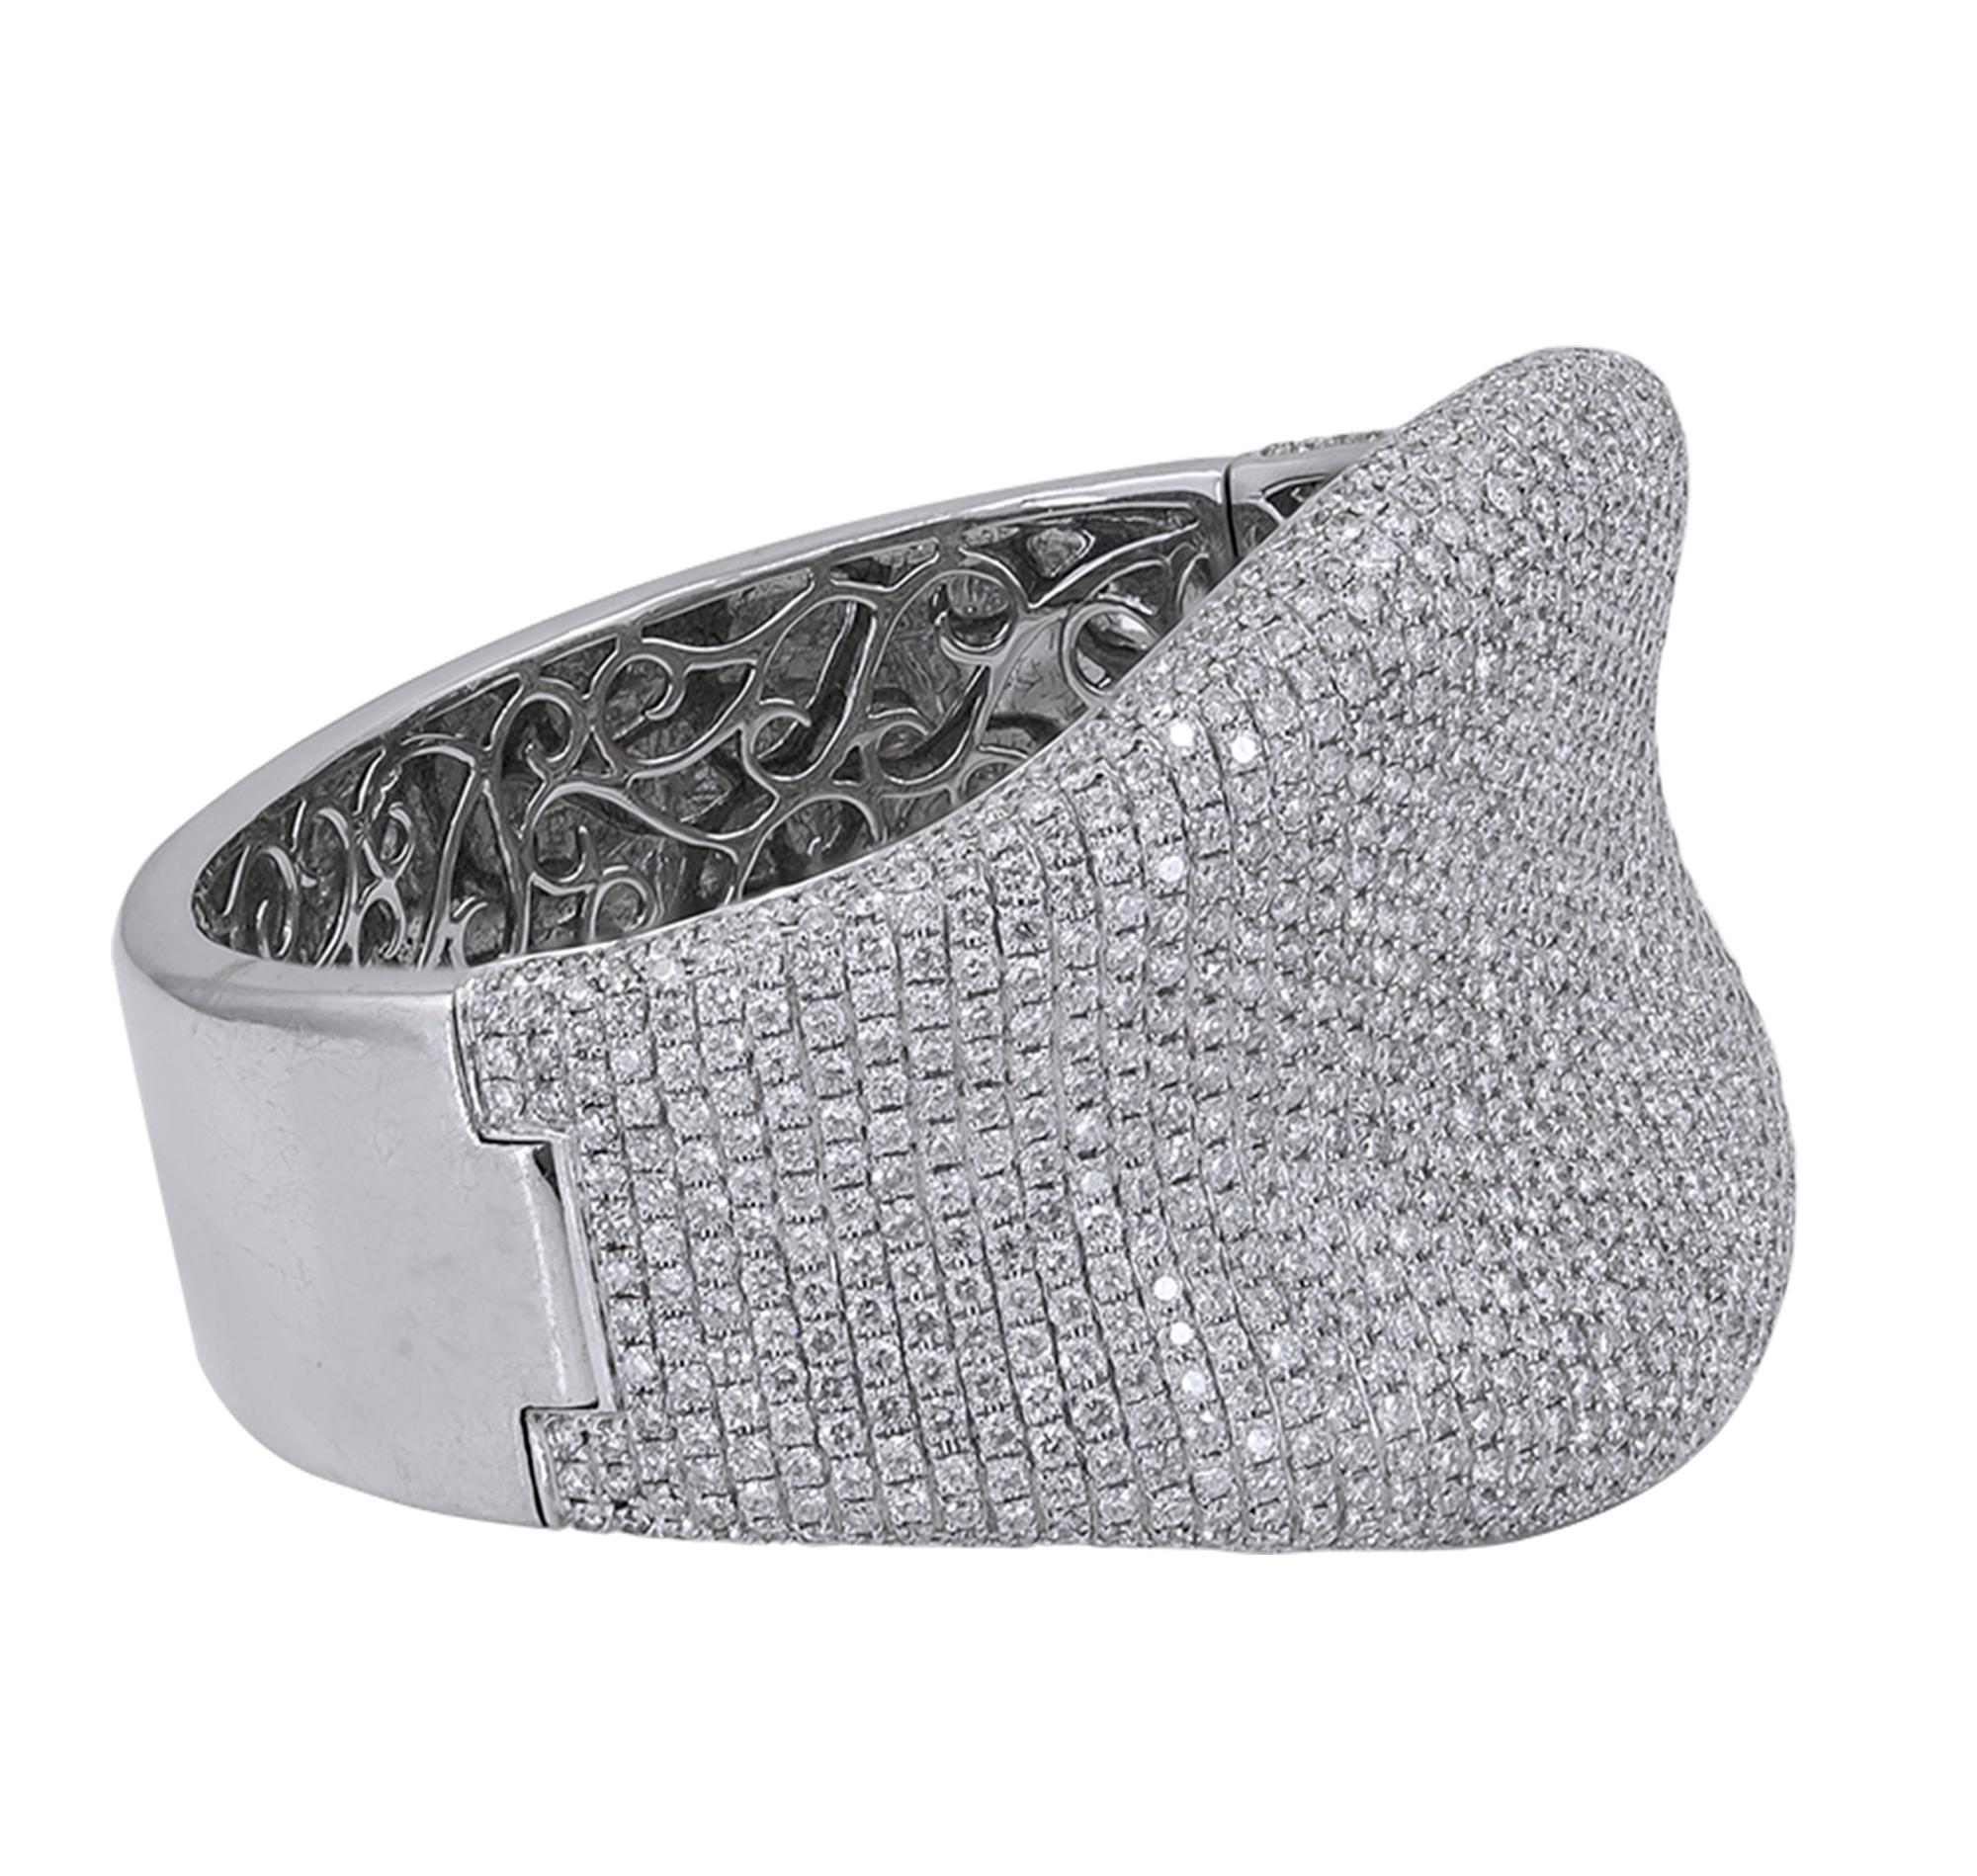 One cannot help but want to get a closer look at the beguiling texture of this cuff bracelet. The bewitching Diamond Pavé Cuff Bracelet made by Spectra Fine Jewelry in the Contemporary era, 2019, is crafted in 18K white gold and embellished on the